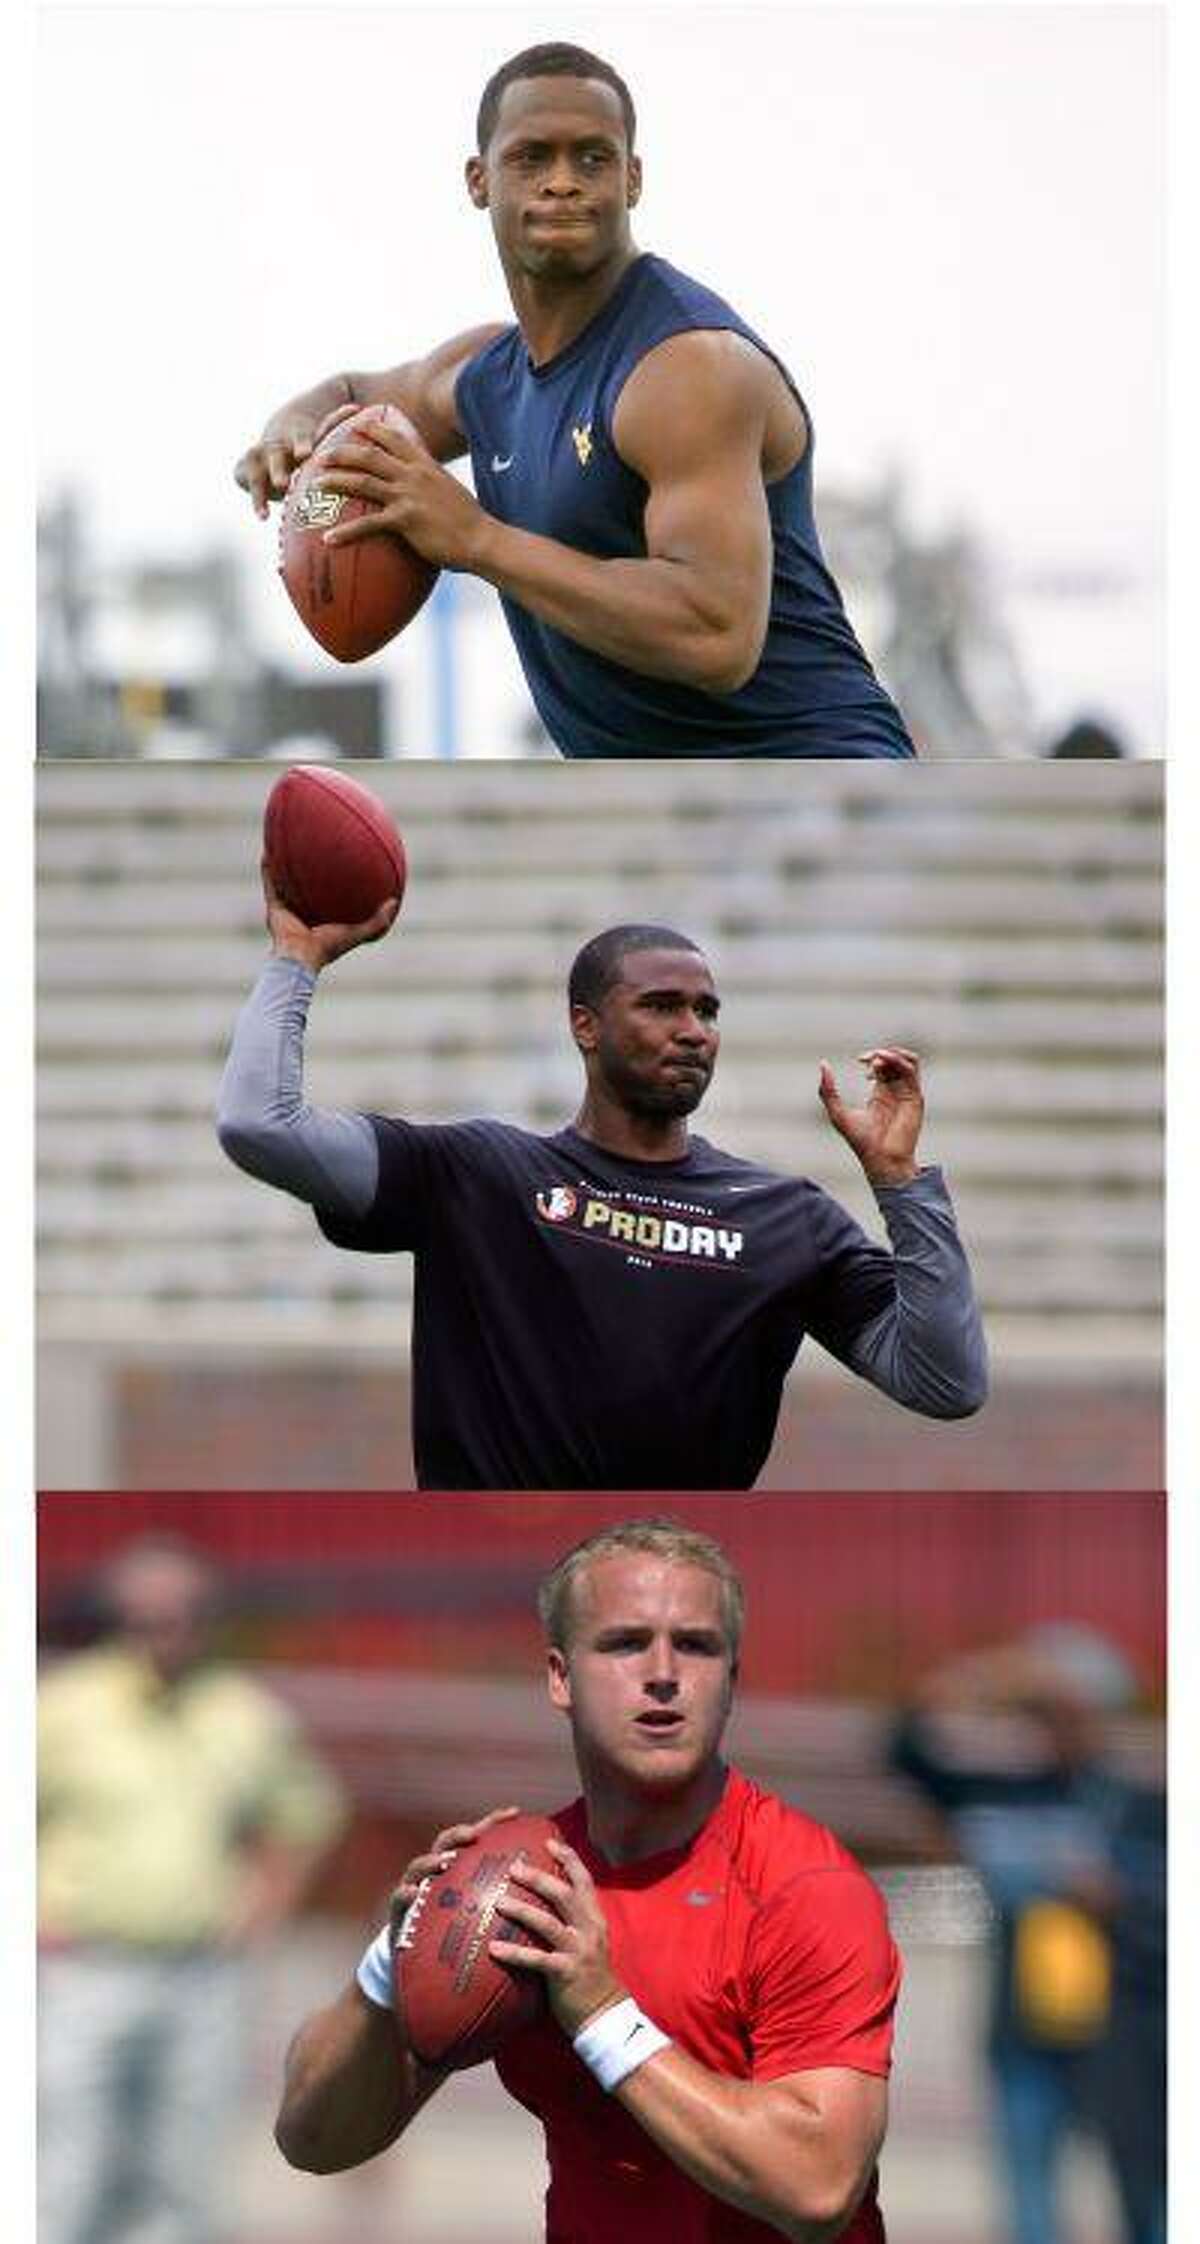 FILE- This combo image of March 2013 file photos shows quarterbacks, from top, Geno Smith, E.J. Manuel and Matt Barkley during their respective NFL football pro days. Will any quarterbacks be taken in the first round? Possibilities include Geno Smith, Matt Barkley and E.J. Manuel_one of the things to watch for during the three-day NFL draft beginning Thursday, April 25, 2013. (AP Photos/File)